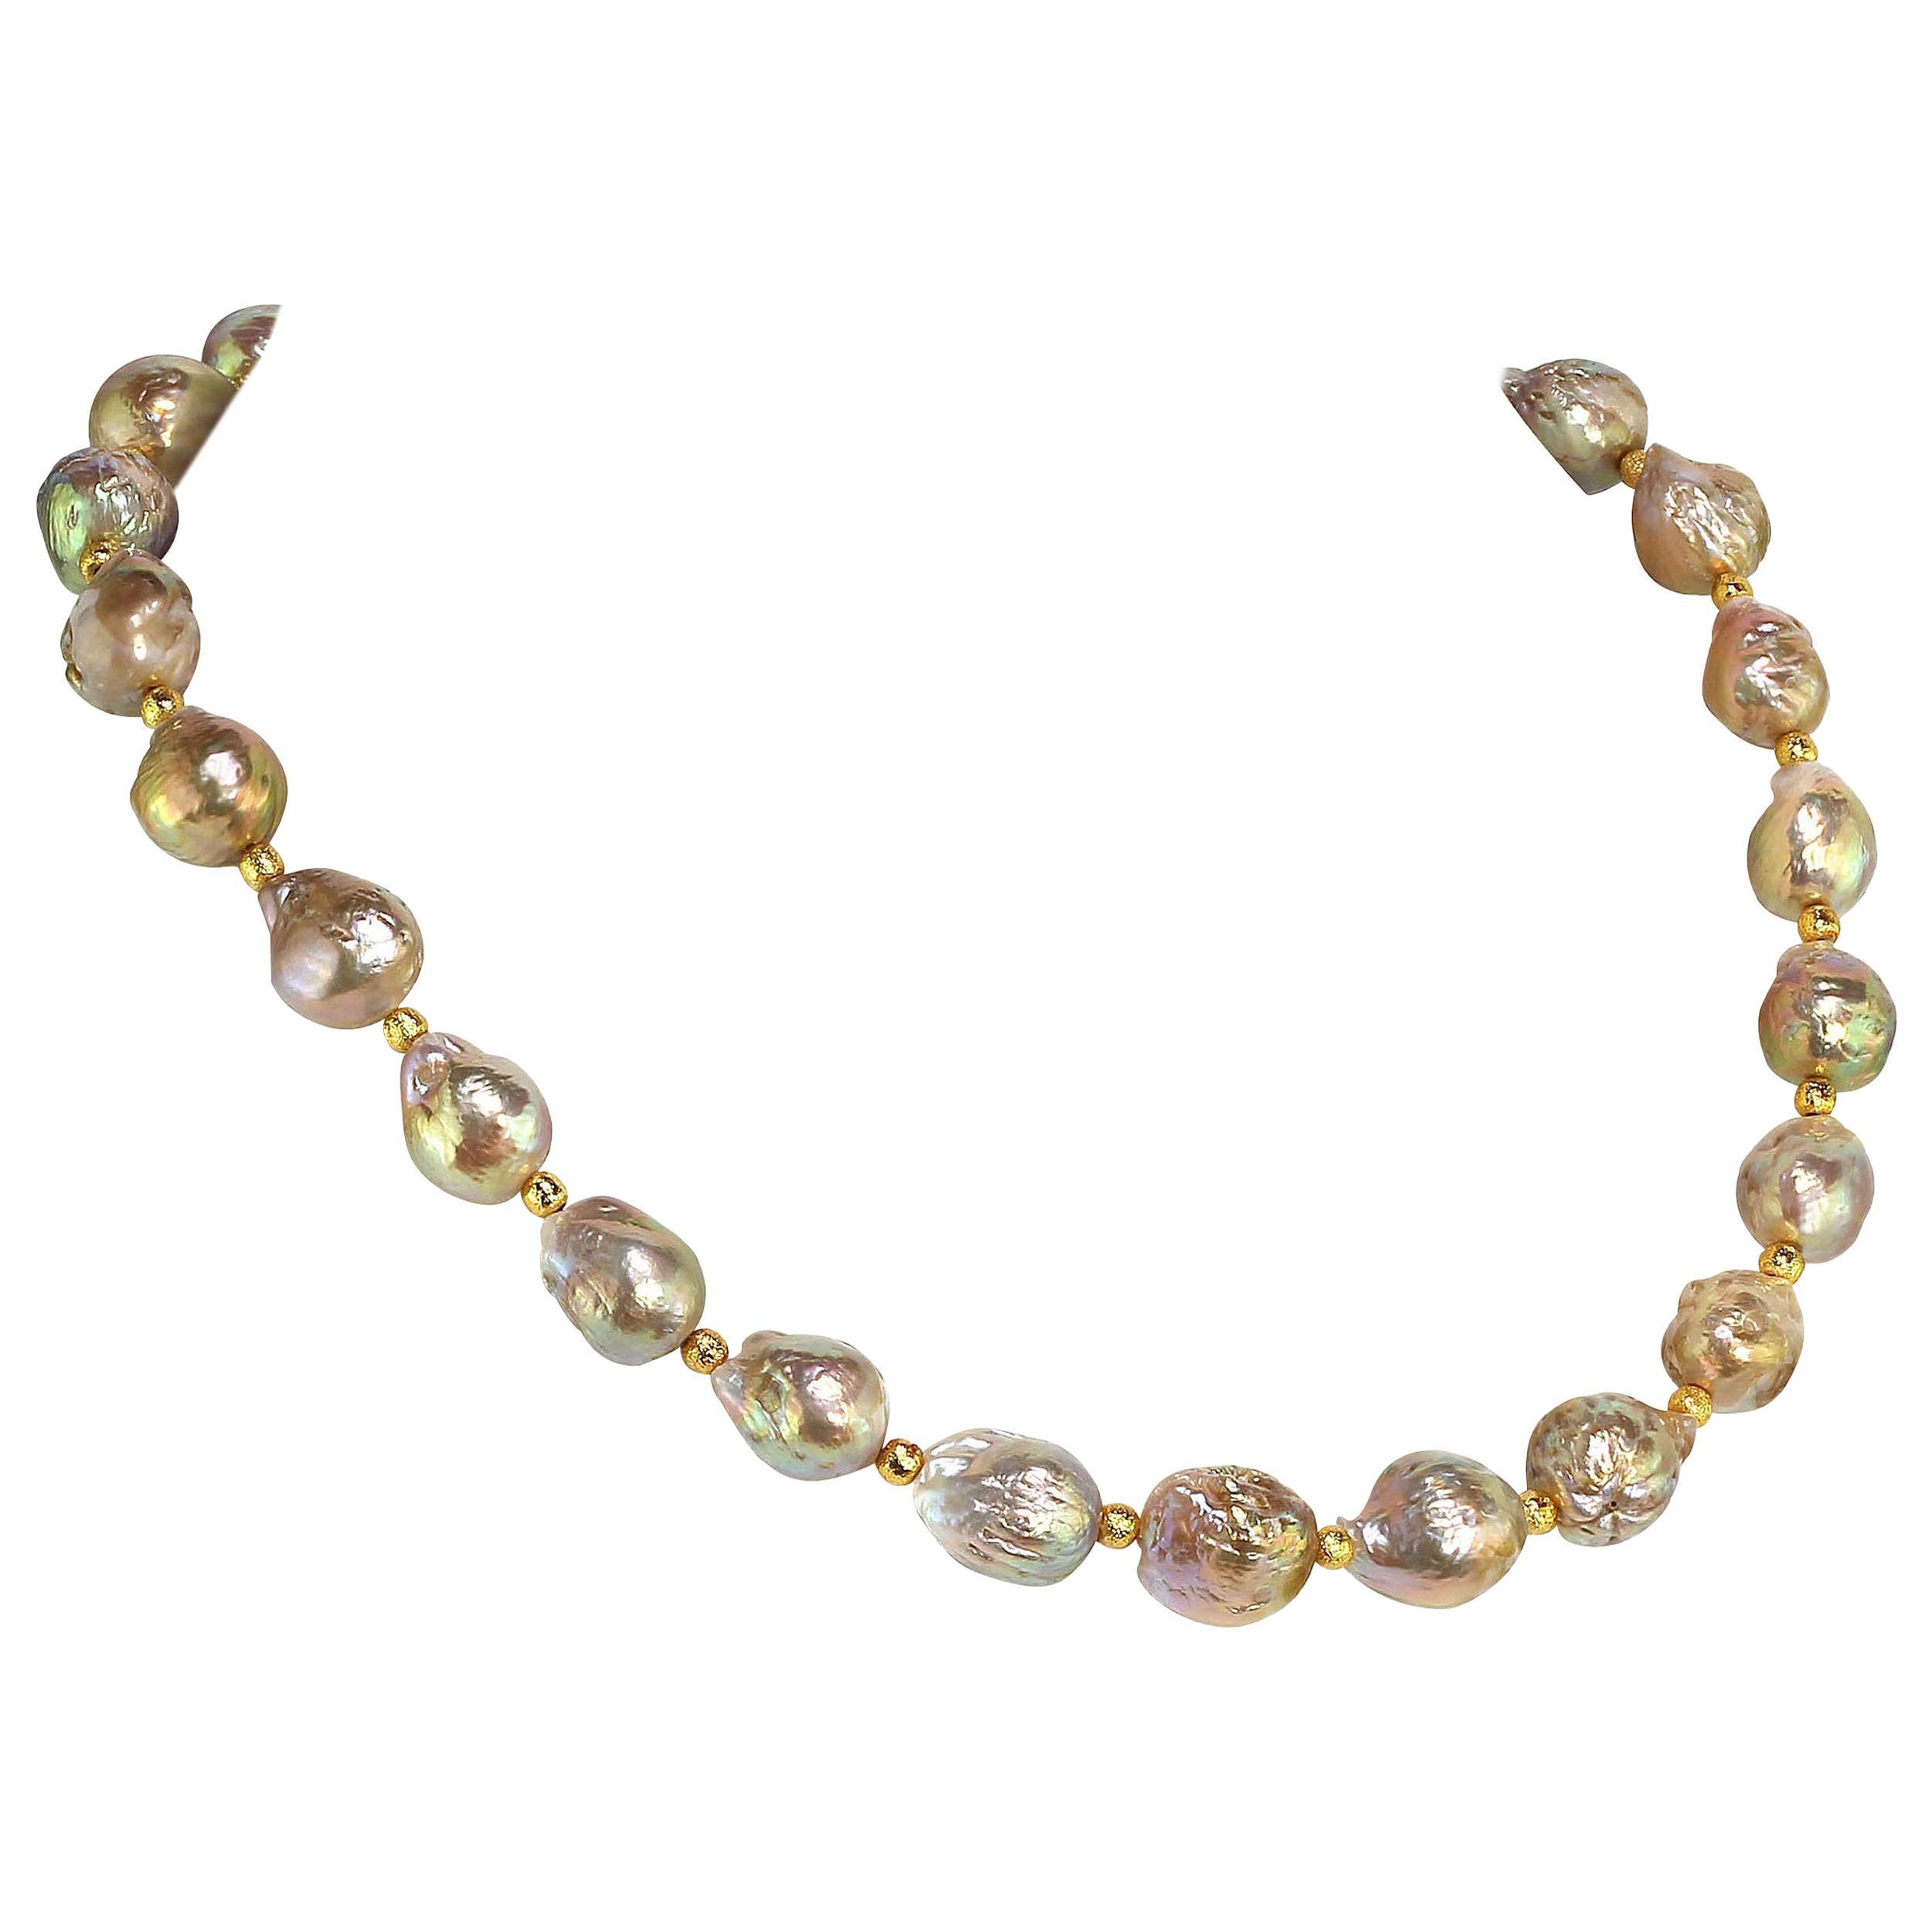 Own the pearls you desire

Iridescent Golden Baroque Pearl necklace that will be your 'go to' necklace from the moment you get it home. The pearls in this unique necklace flash pink, yellow, and green. At 18 inches this one of a kind necklace sits